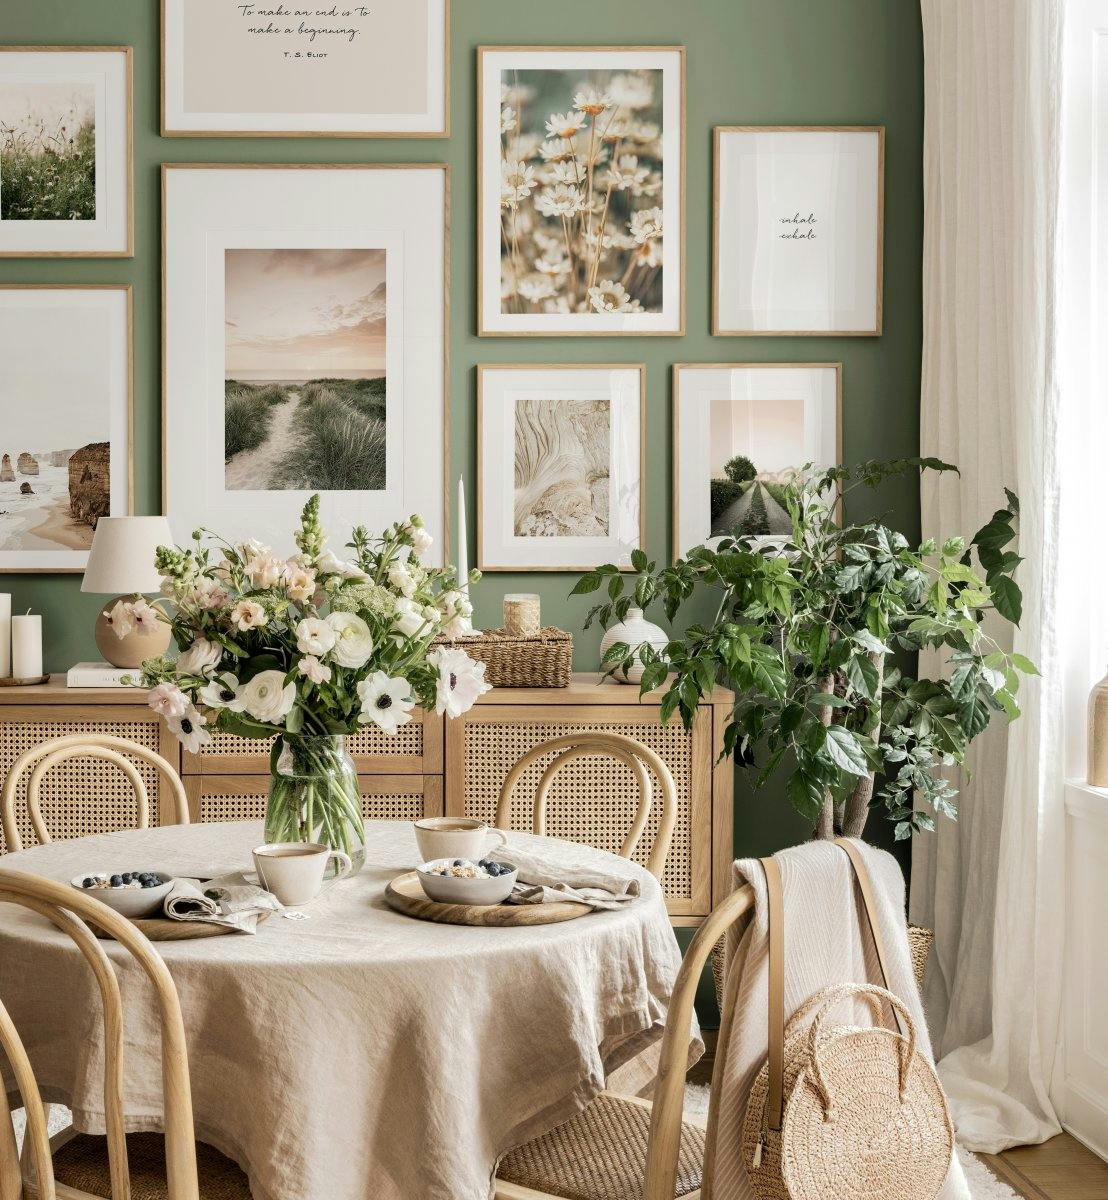 Summertime gallery wall green dining room landscape posters